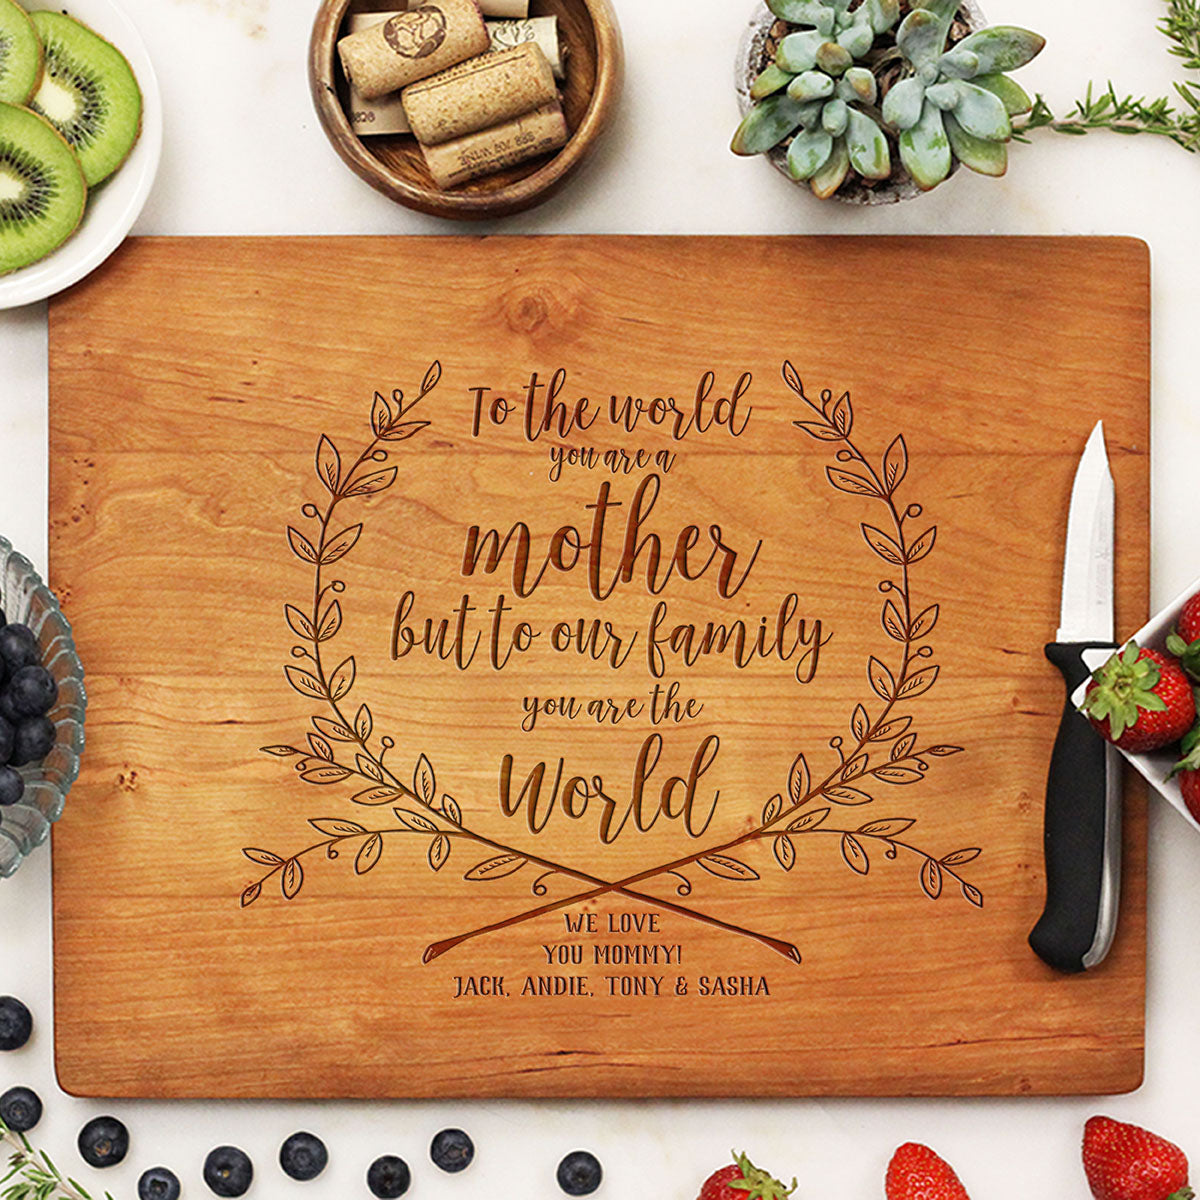 Personalized, Engraved Cutting Board with Worlds Greatest Mom Design for  Mother's Day or Anniversary #110